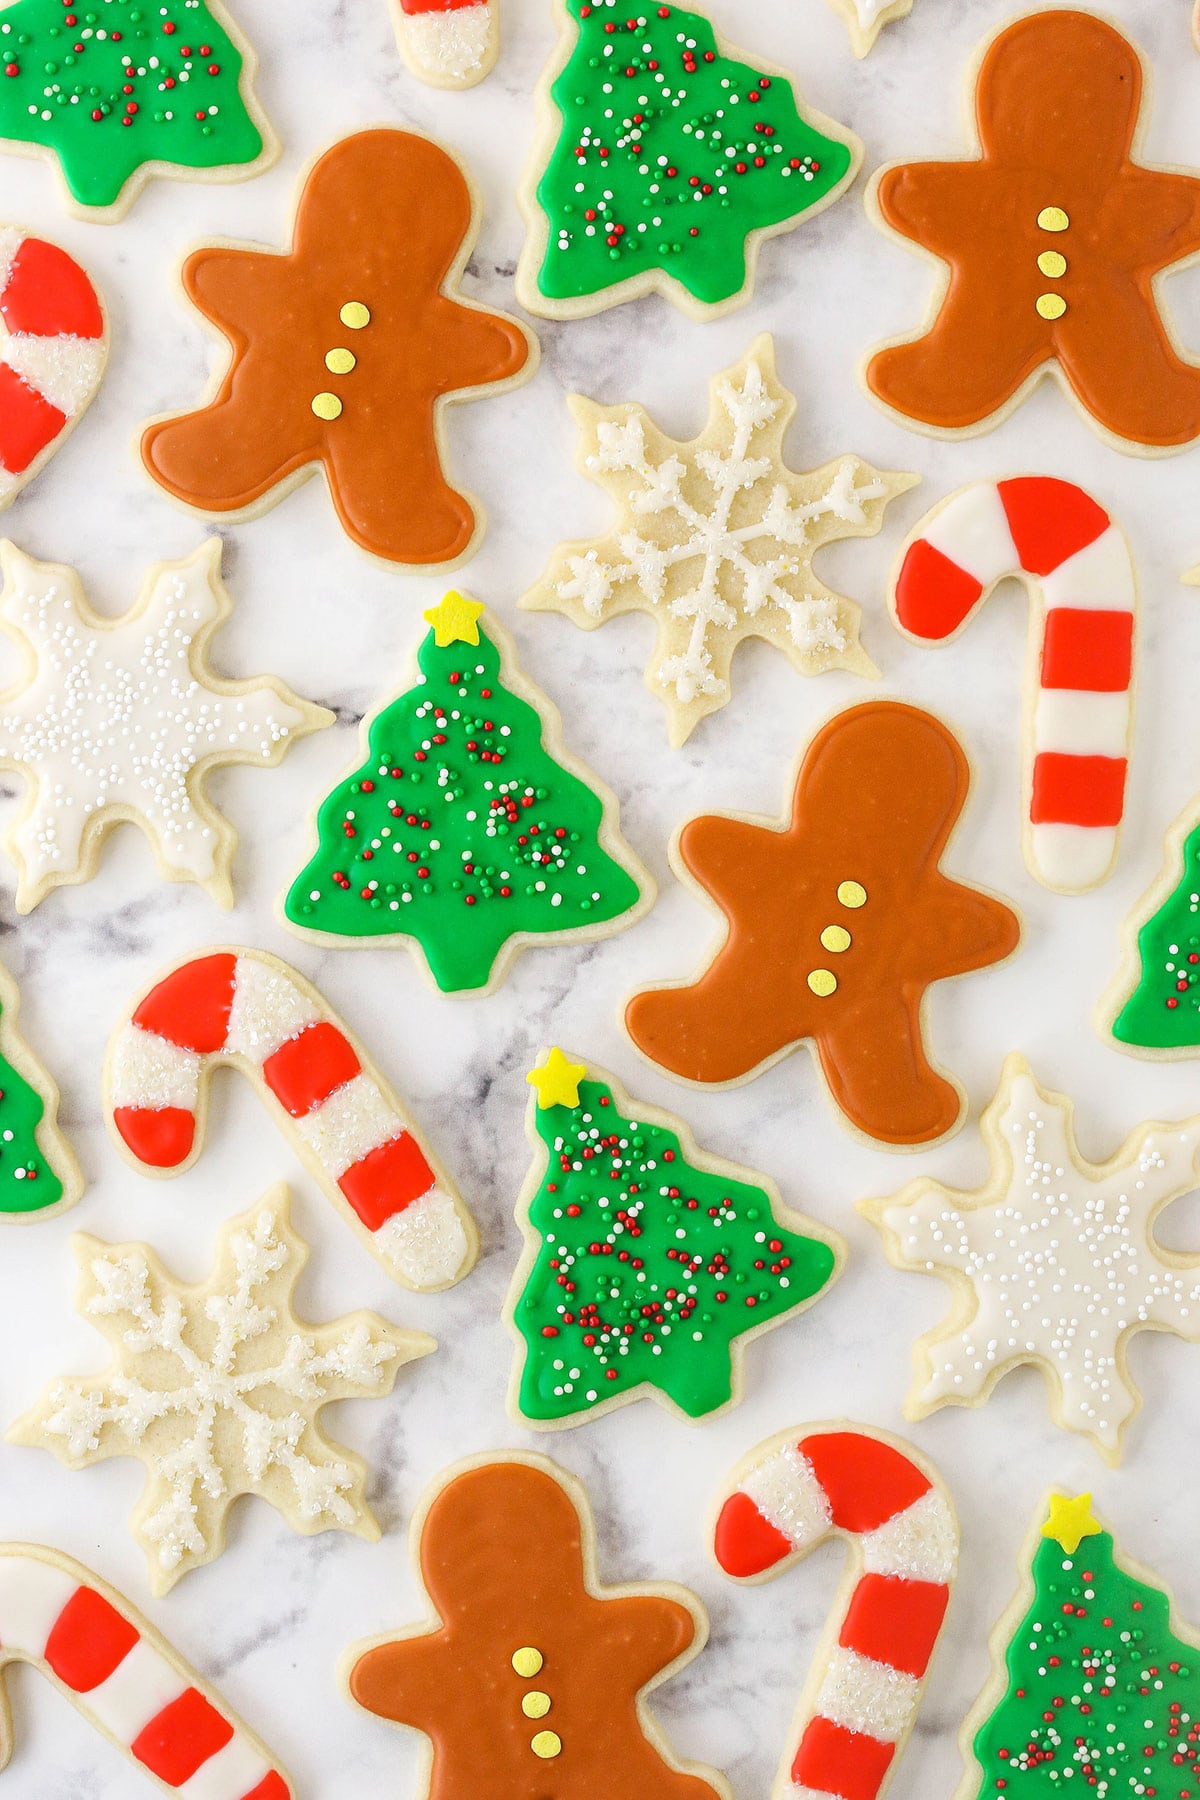 A bunch of sugar cookies decorated like candy canes, snowflakes, Christmas trees and gingerbread men on a countertop